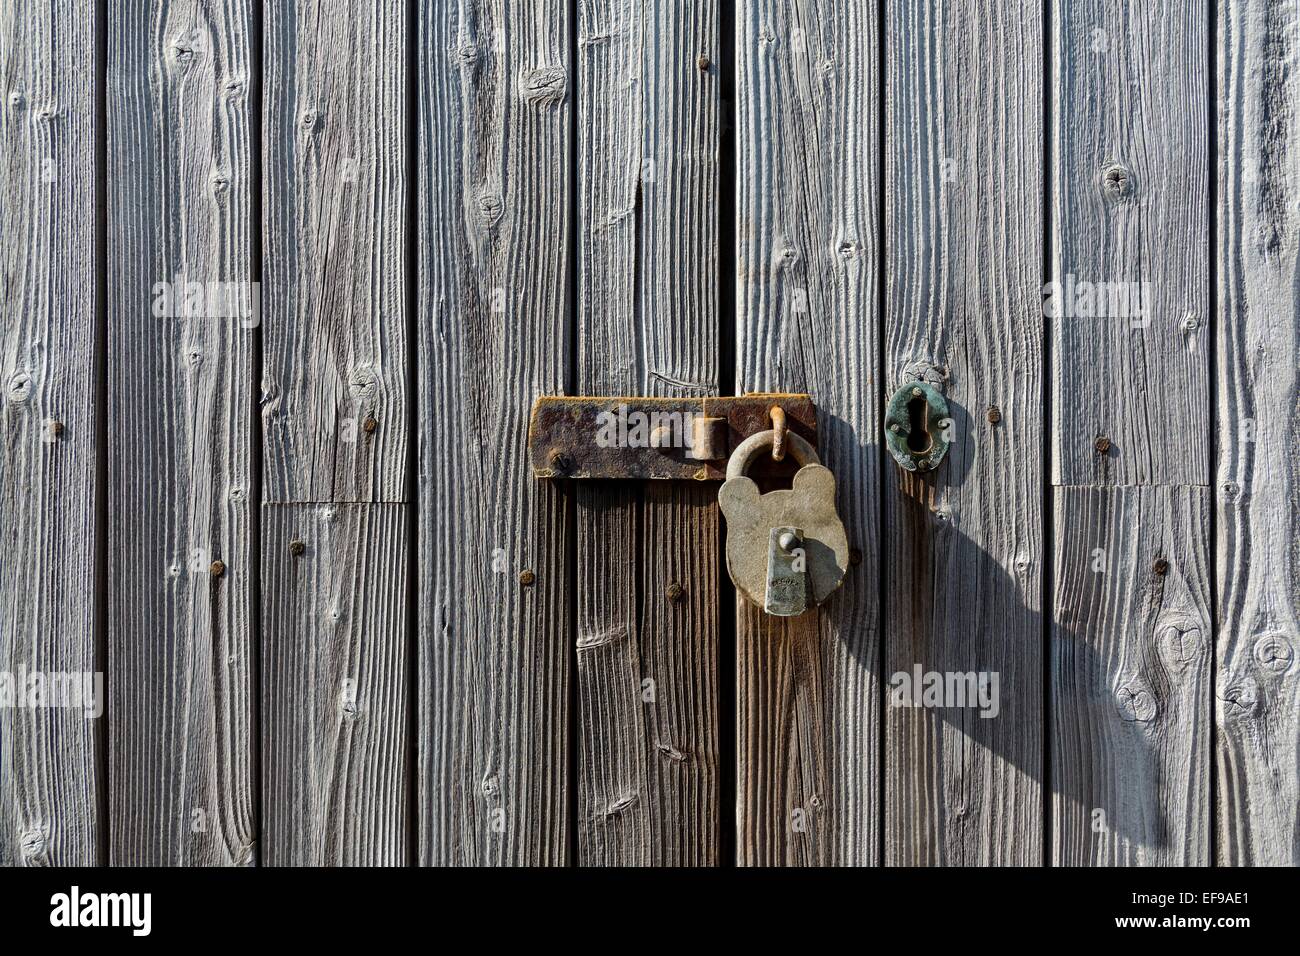 Old weathered and rusting metal latch and padlock on an old weathered wooded slatted door.  Picture includes a metal keyhole. Stock Photo